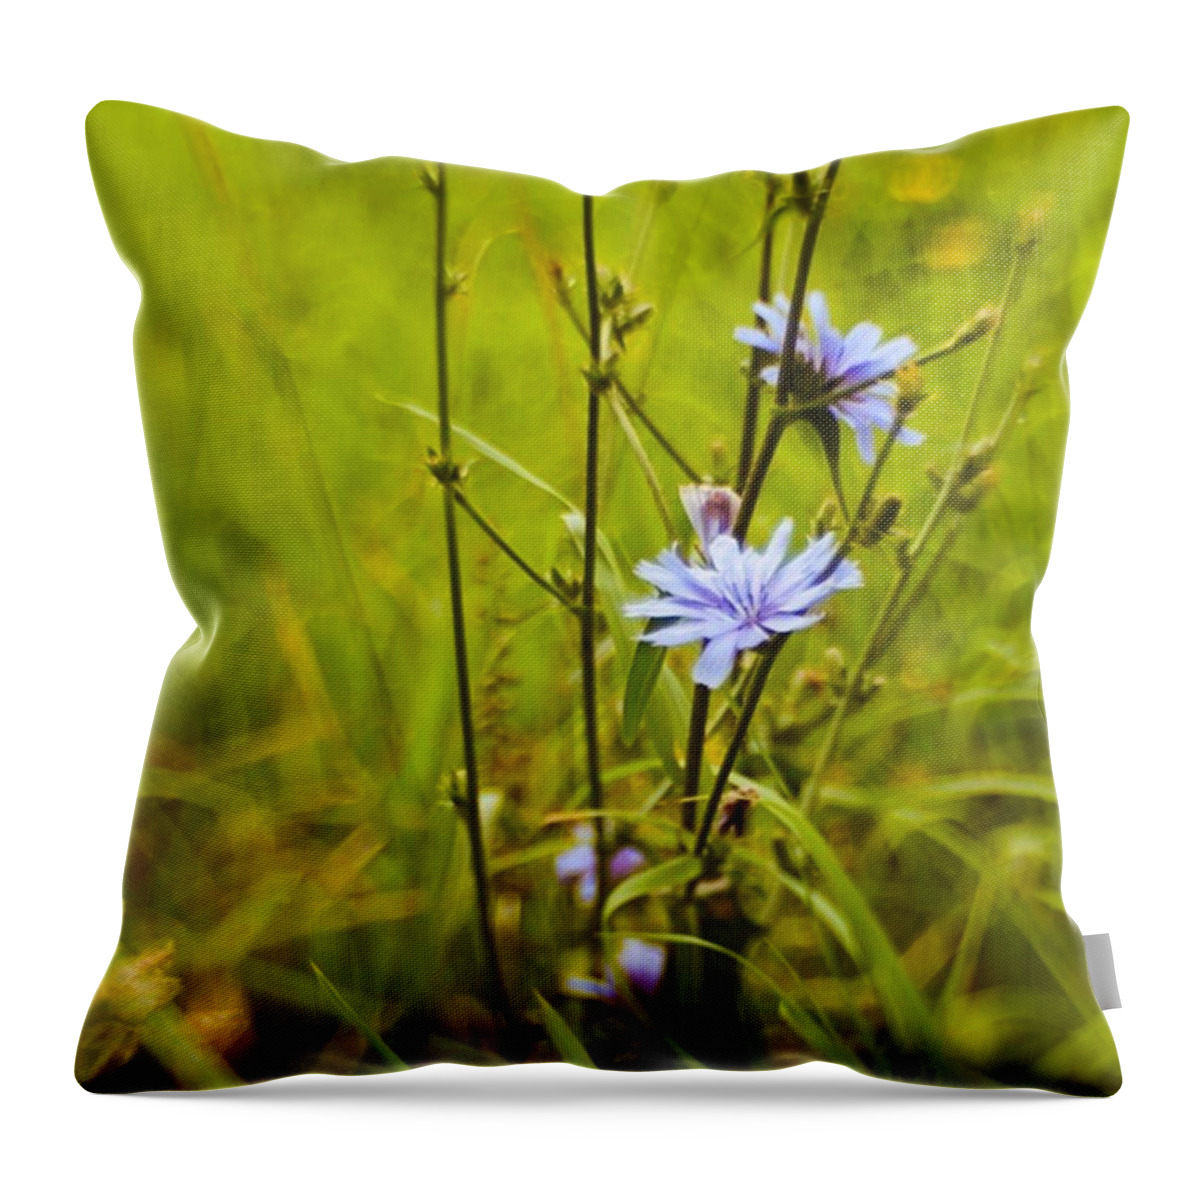 Composerpro Throw Pillow featuring the photograph #flowers #lensbaby #composerpro by Mandy Tabatt